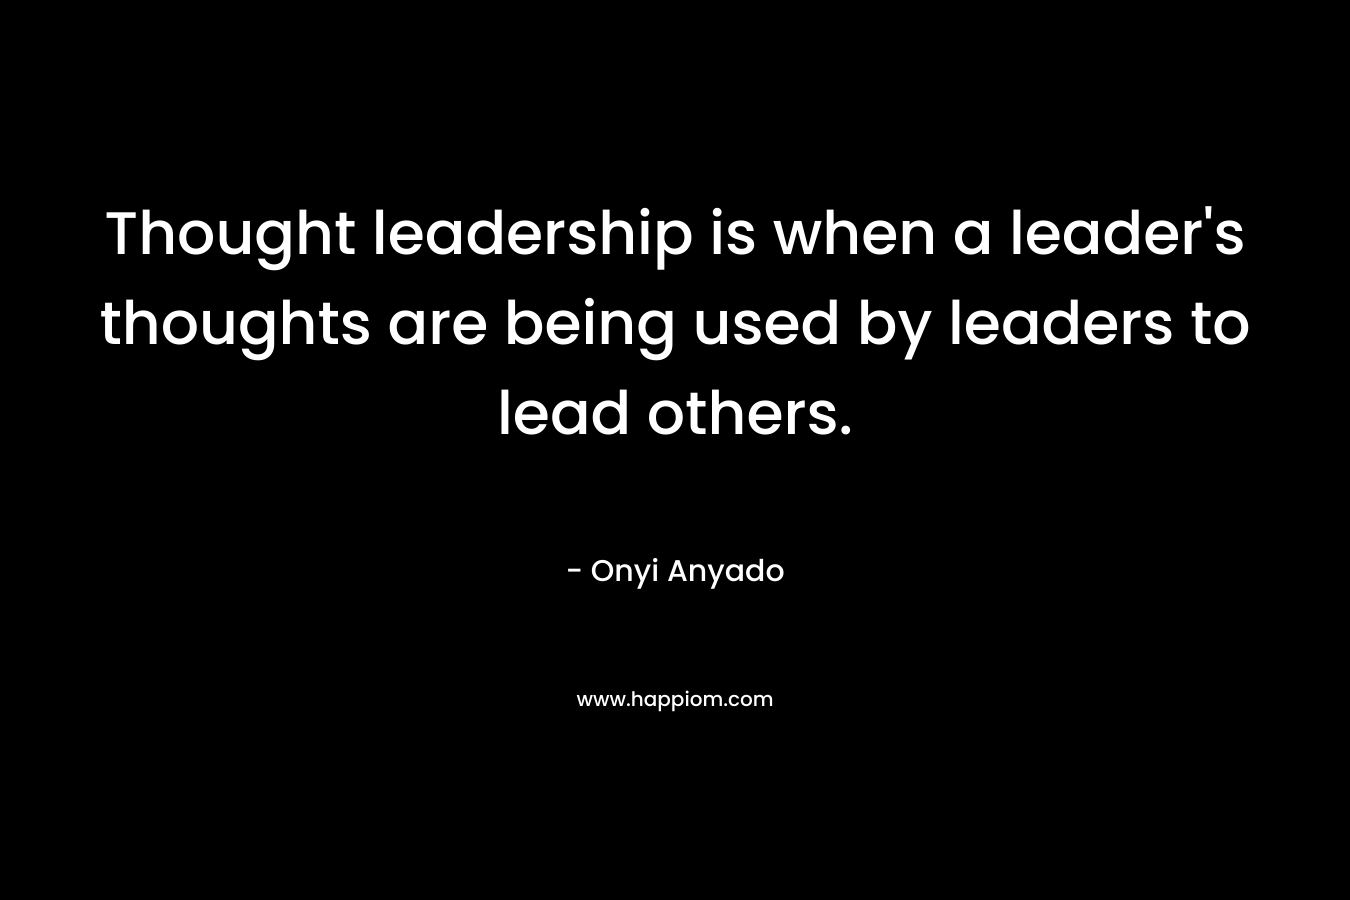 Thought leadership is when a leader's thoughts are being used by leaders to lead others.